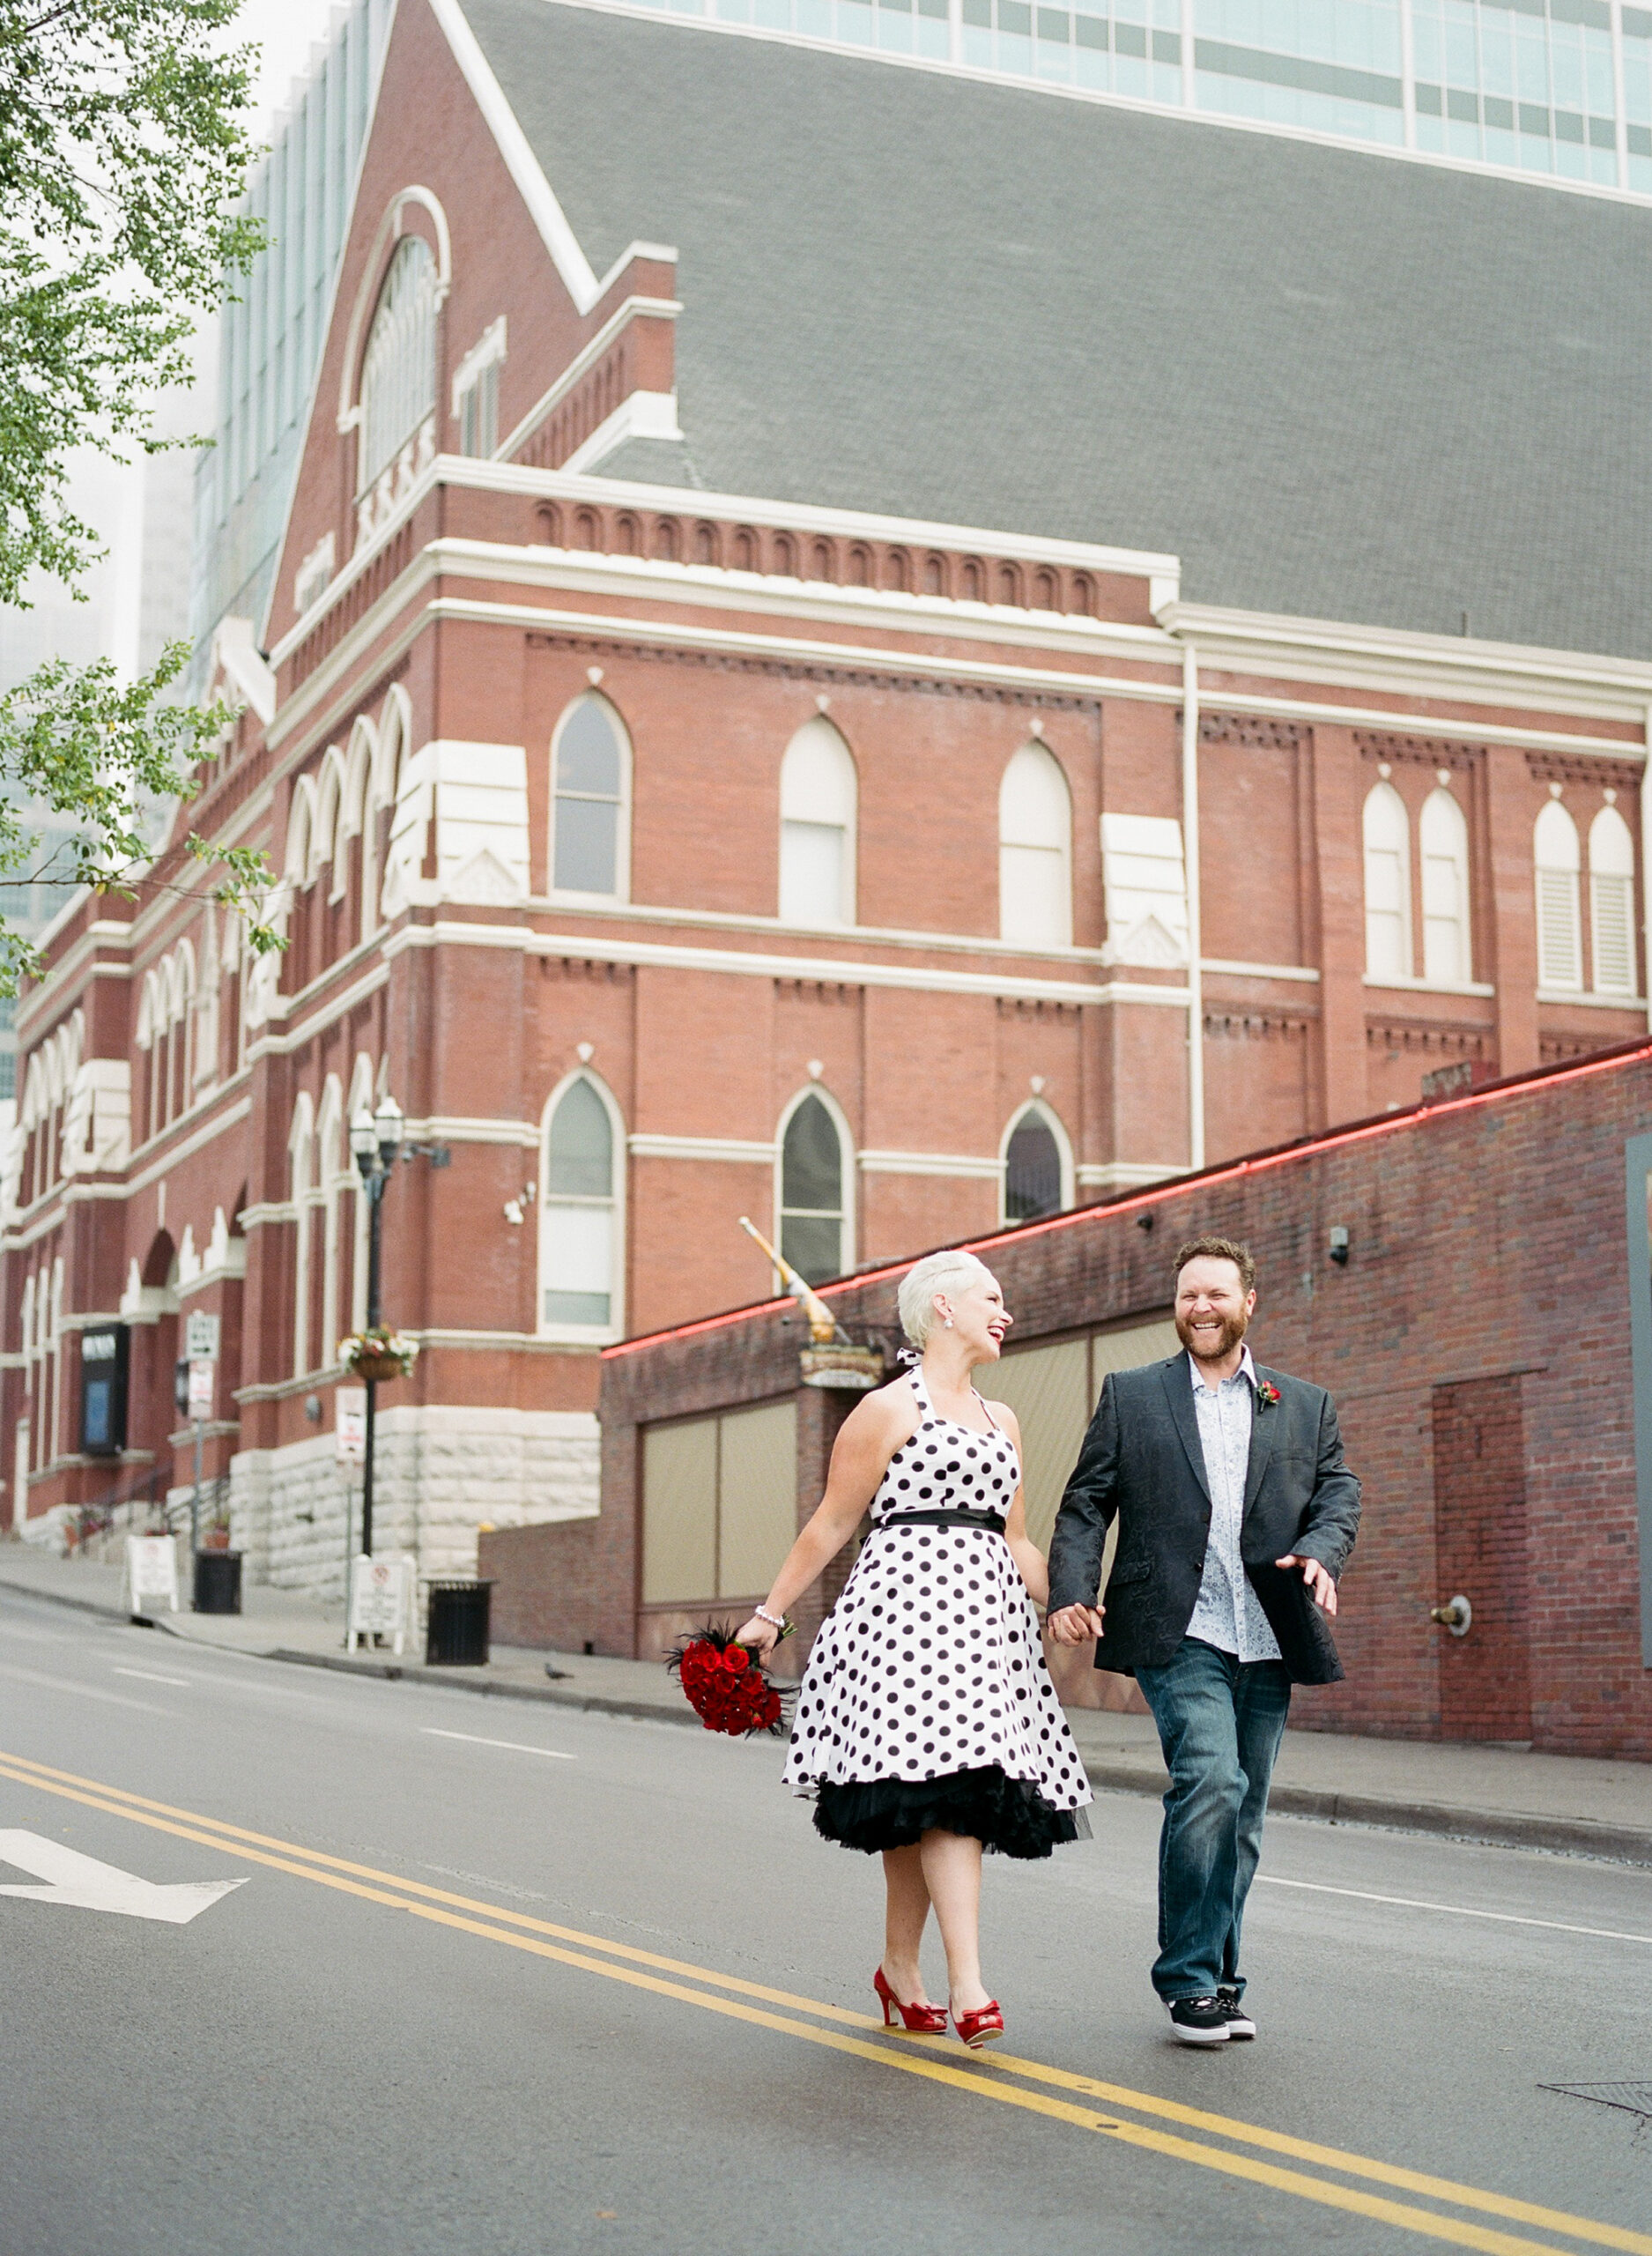 Walking down 2nd Avenue in Nashville along side the Ryman Auditorium, the bride and groom hold hands laughing as they look at each other. The bride is wearing a halter neck white pinup dress with black polka dots. She has a black belt and a black crinoline petticoat. The bride has bright red lipstick to match her bright red peep toe shoes with a small bow and her bright red rose bouquet accented with rhinestones and black feathers. The groom is wearing a black silk suit jacket with a paisley pattern, a white shirt with small blue flowers, a red rose boutonniere and dark washed jeans. 